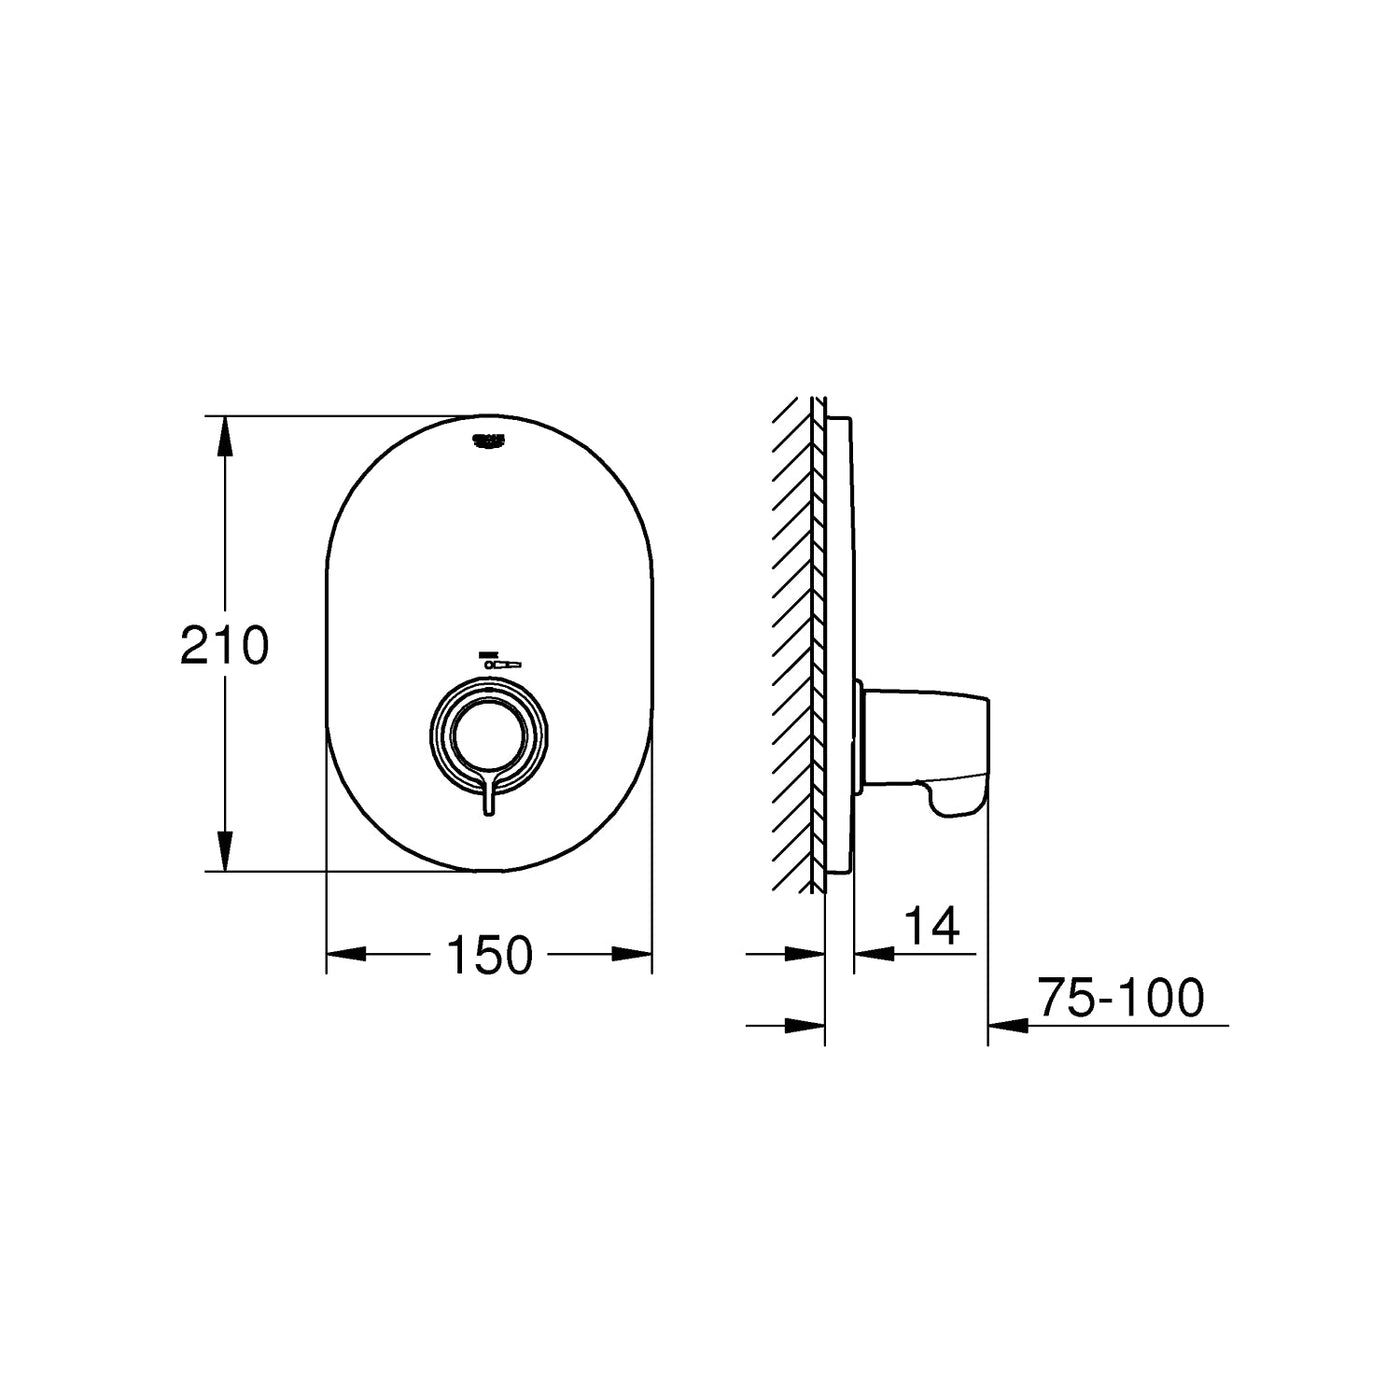 Grohe Chrome Grohtherm Special Trim for thermostatic shower valve - Letta London - Thermostatic Showers